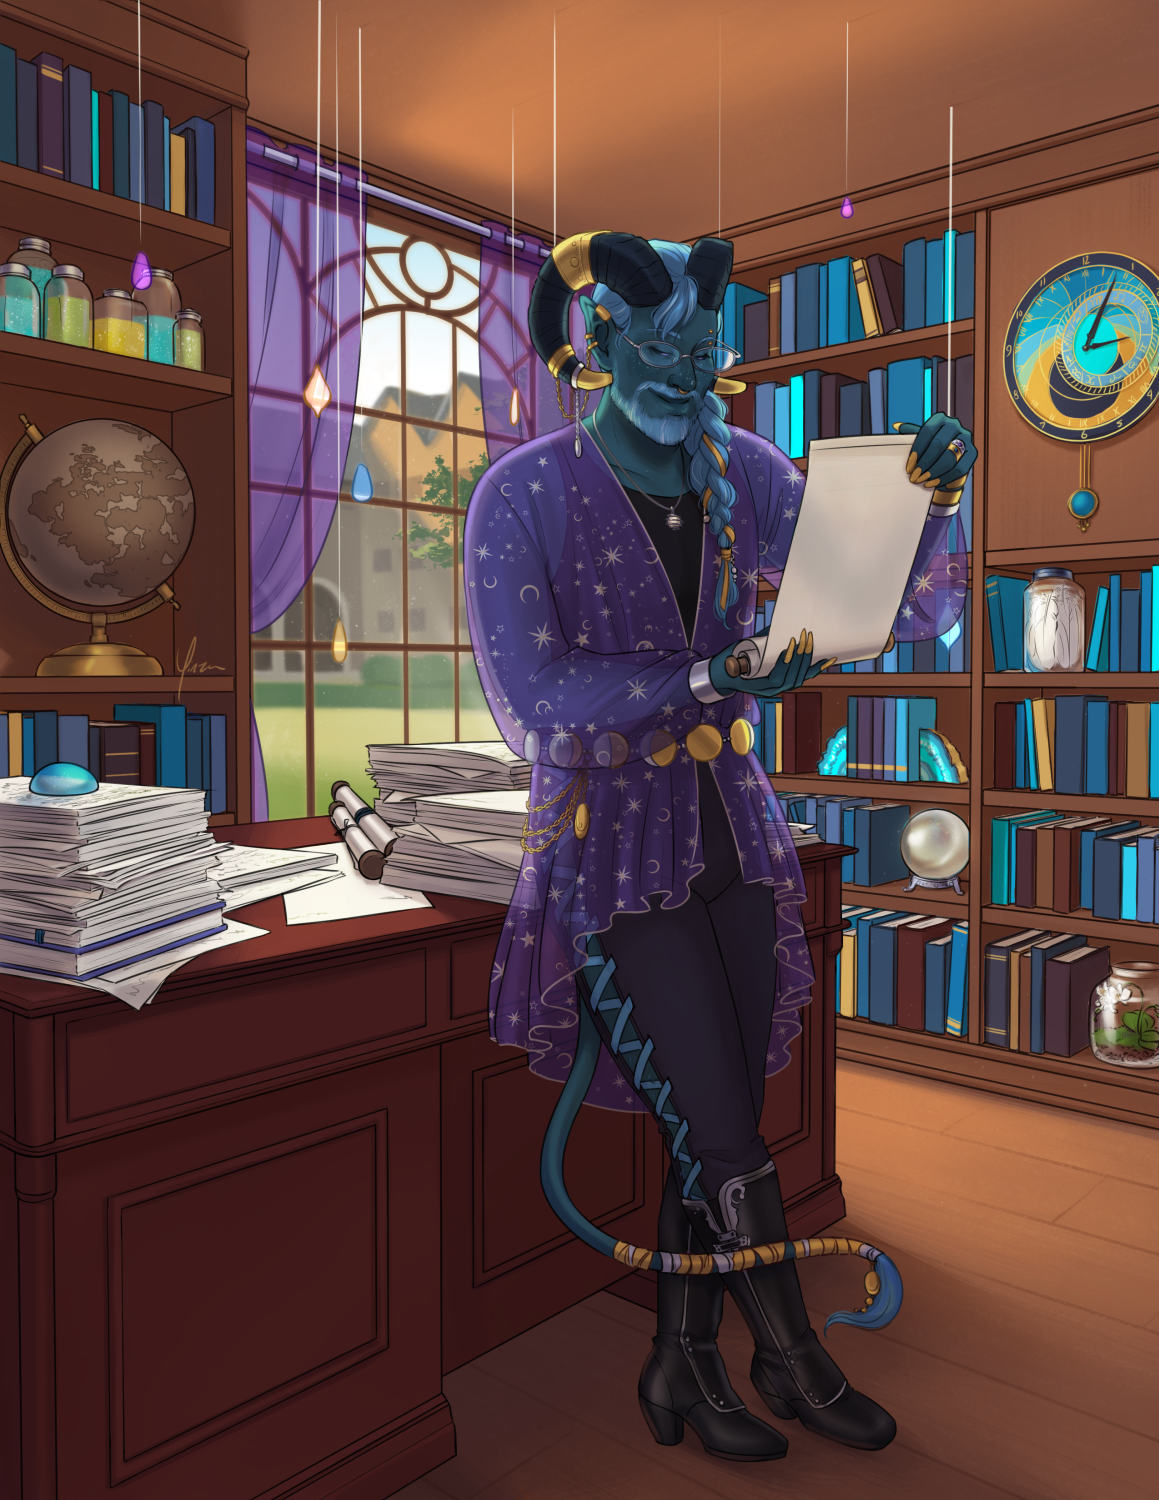 A digital illustration of a tiefling in their office. The office is warm, with wood floors and built-in bookshelves filled not only with books but various jars, a terrarium, and a globe. A clock hangs on one wall, and sunlight filters in through a large window which faces a campus courtyard outside. The tiefling leans against a mahogany desk laden with stacks of papers. The tiefling herself has dark blue skin with light freckles, dark blue ram's horns, light blue hair, and a tufted lion's tail. Her hair is braided over her left shoulder, and she has a short beard. He wears a translucent purple blouse with a starry pattern over a dark tank top and pants with a ribbon lacing up the sides, and knee-high black boots with silver detailing. In addition to ovular silver glasses, they wear a number of pieces of jewelry, including piercings, horn decorations, rings, bracelets, a necklace, and a gold-and-silver belt with the moon phases. They hold a scroll open in their hands, smiling fondly as they read.